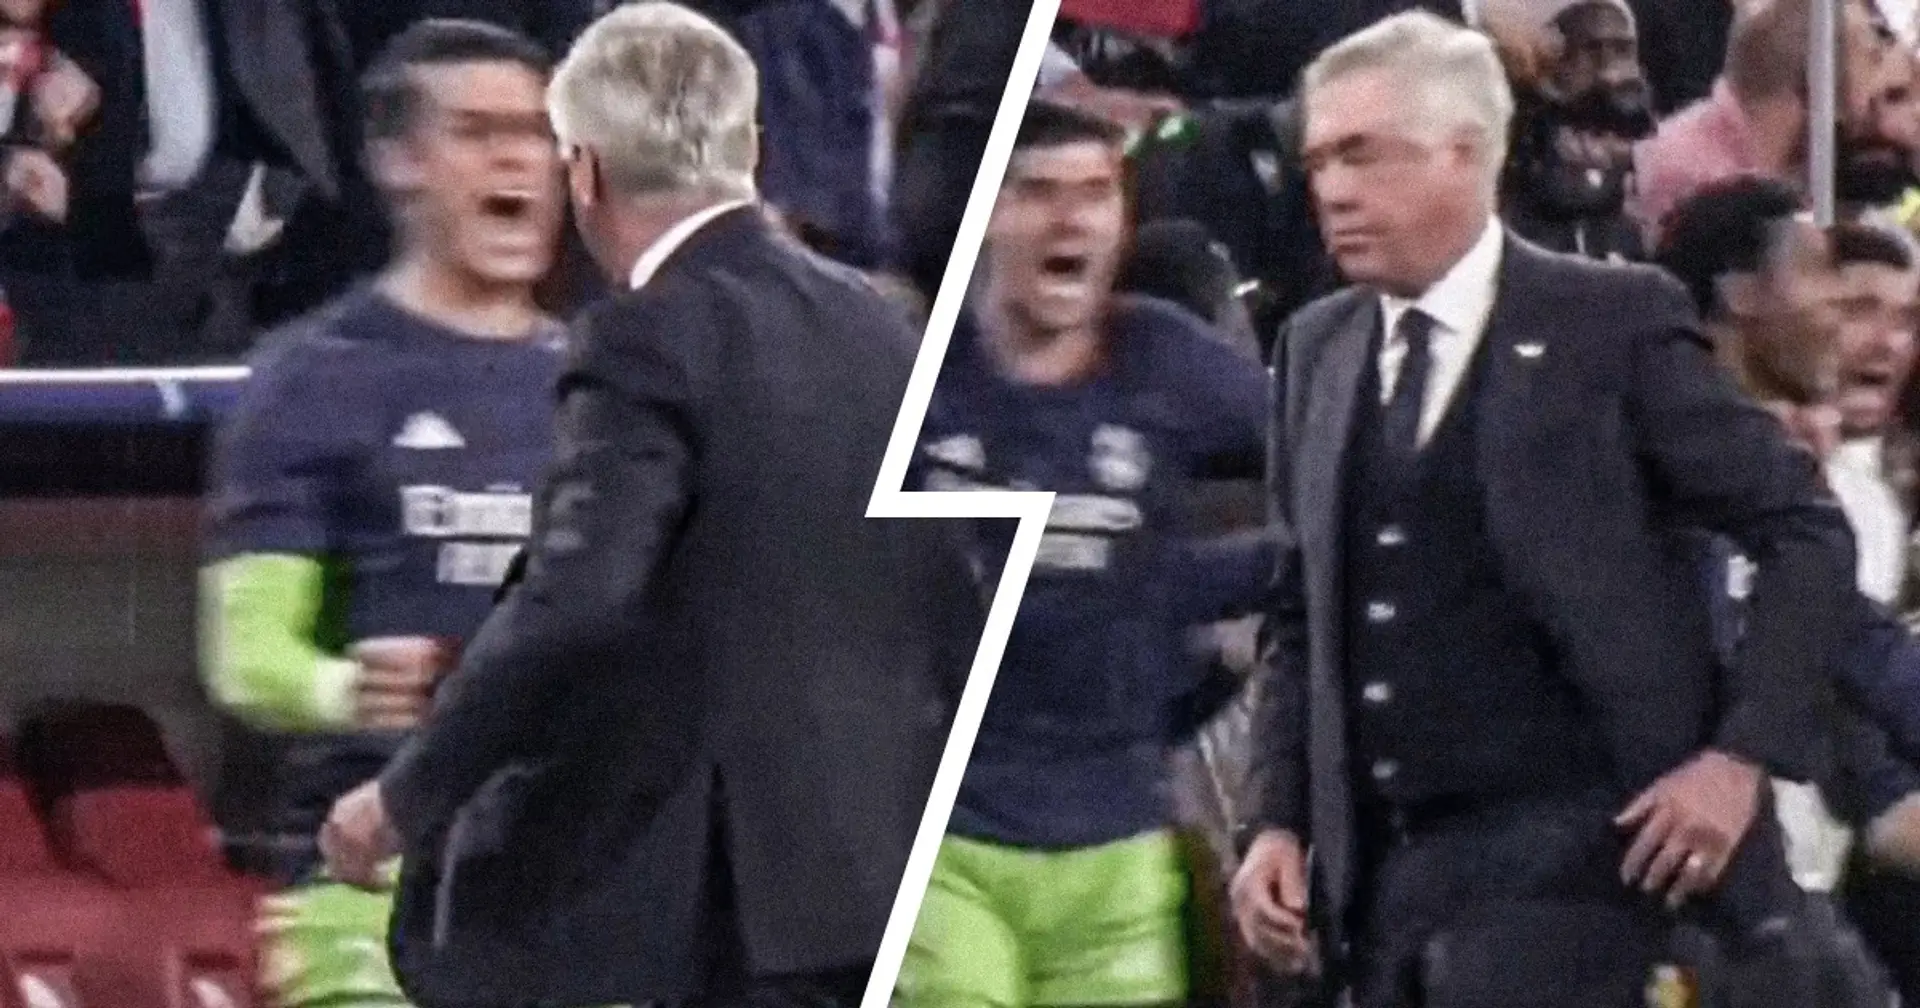 SPOTTED: Ancelotti's reaction to Kroos pass & Vinicius goal v Bayern - he does it often 